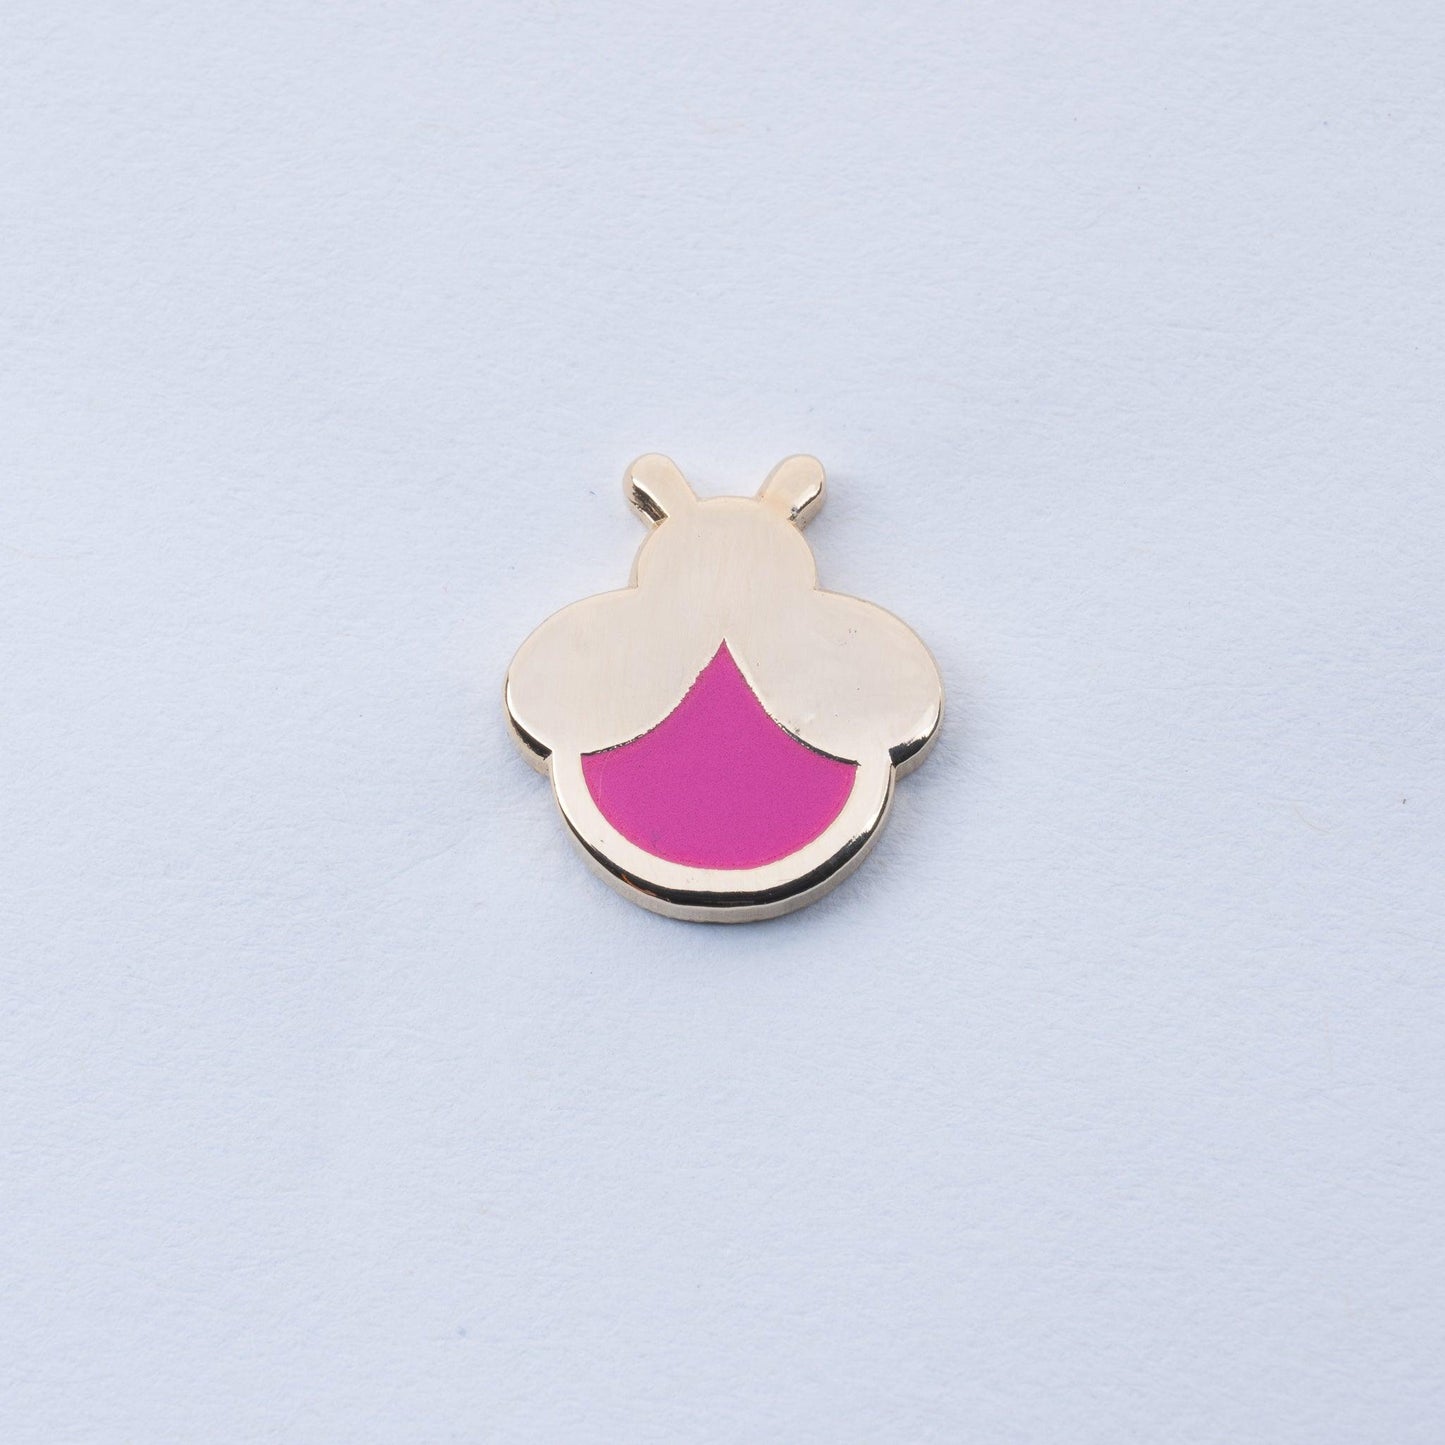 gold plated firefly enamel pin with magenta body that glows in the dark